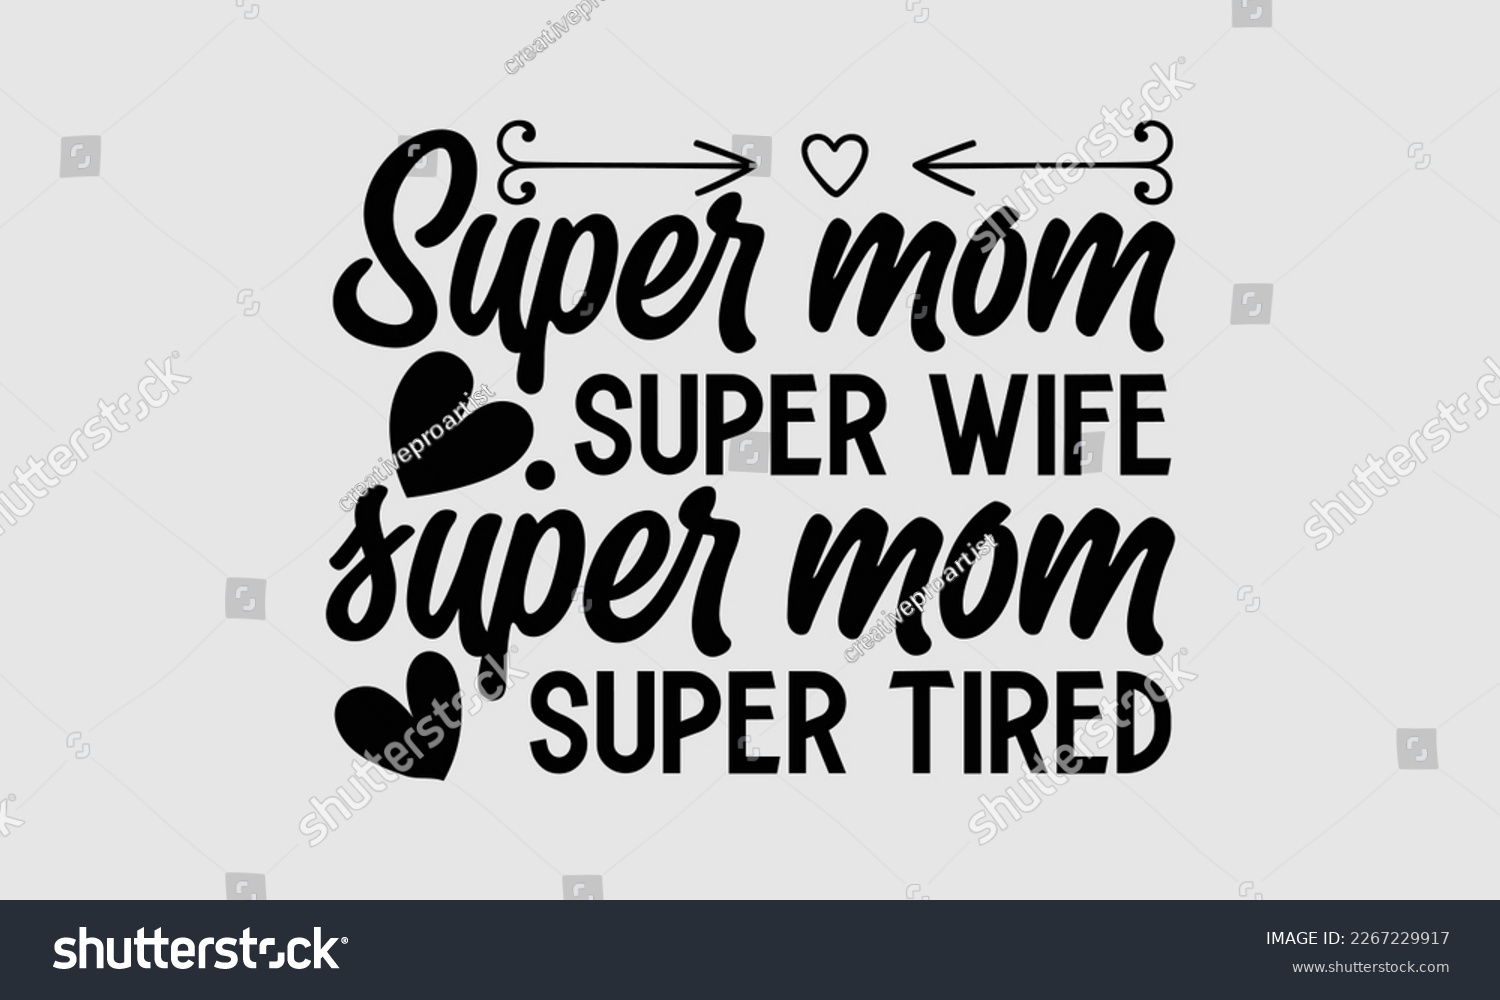 SVG of Super mom super wife super mom super tired- Mother's day t-shirt design, Best Mom Hand drawn typography phrases, vector quotes white background, lettering design svg, EPS 10. svg